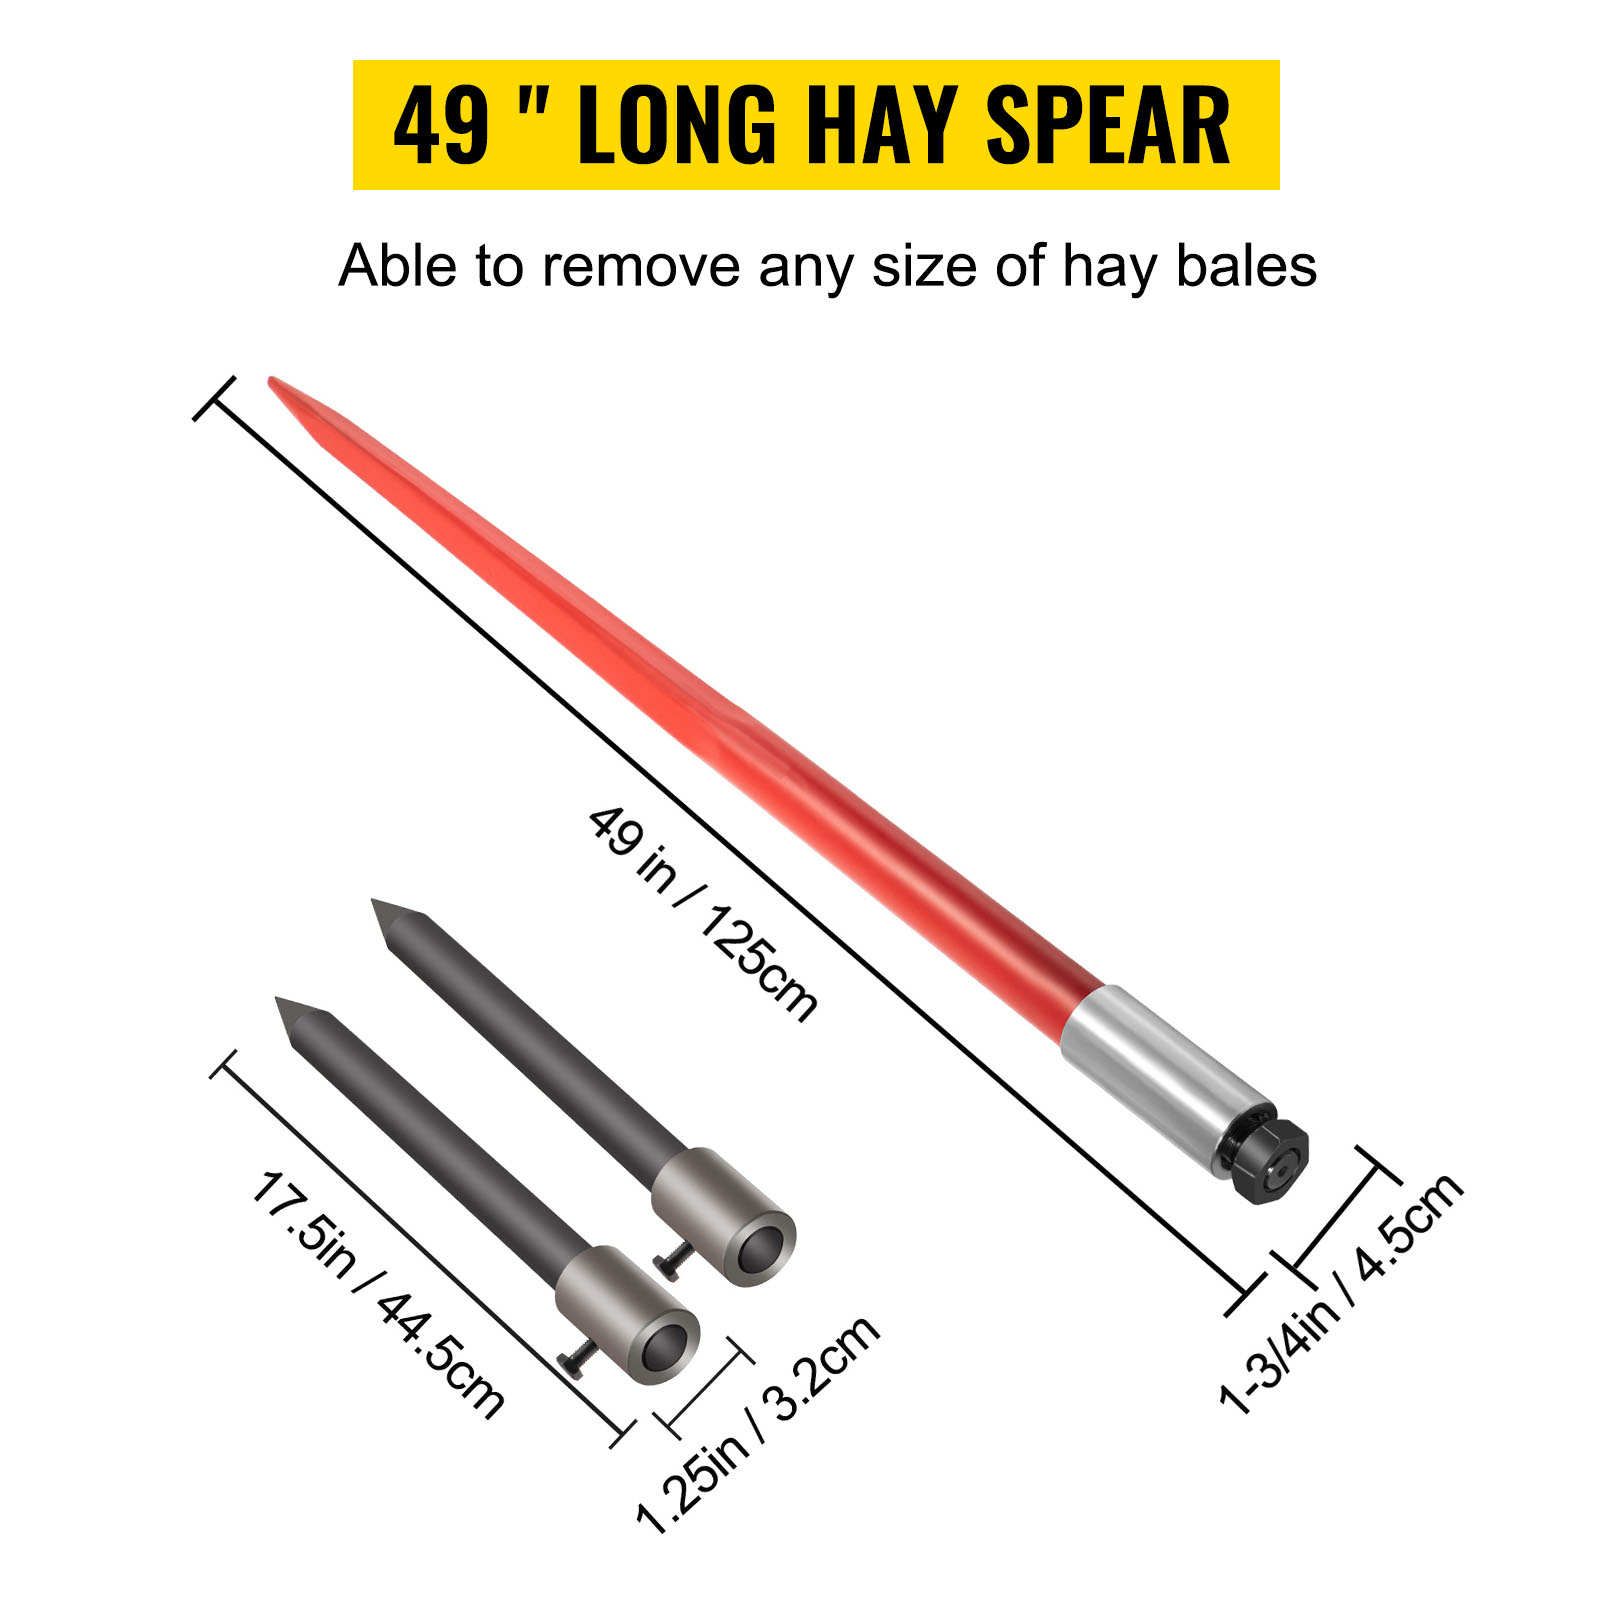 VEVOR Hay Spear 49 Bale Spear 3000 lbs Capacity, Bale Spike Quick Attach  Square Hay Bale Spears 1 3/4 Wide, Red Coated Bale Forks, Bale Hay Spike  with Hex Nut & Sleeve